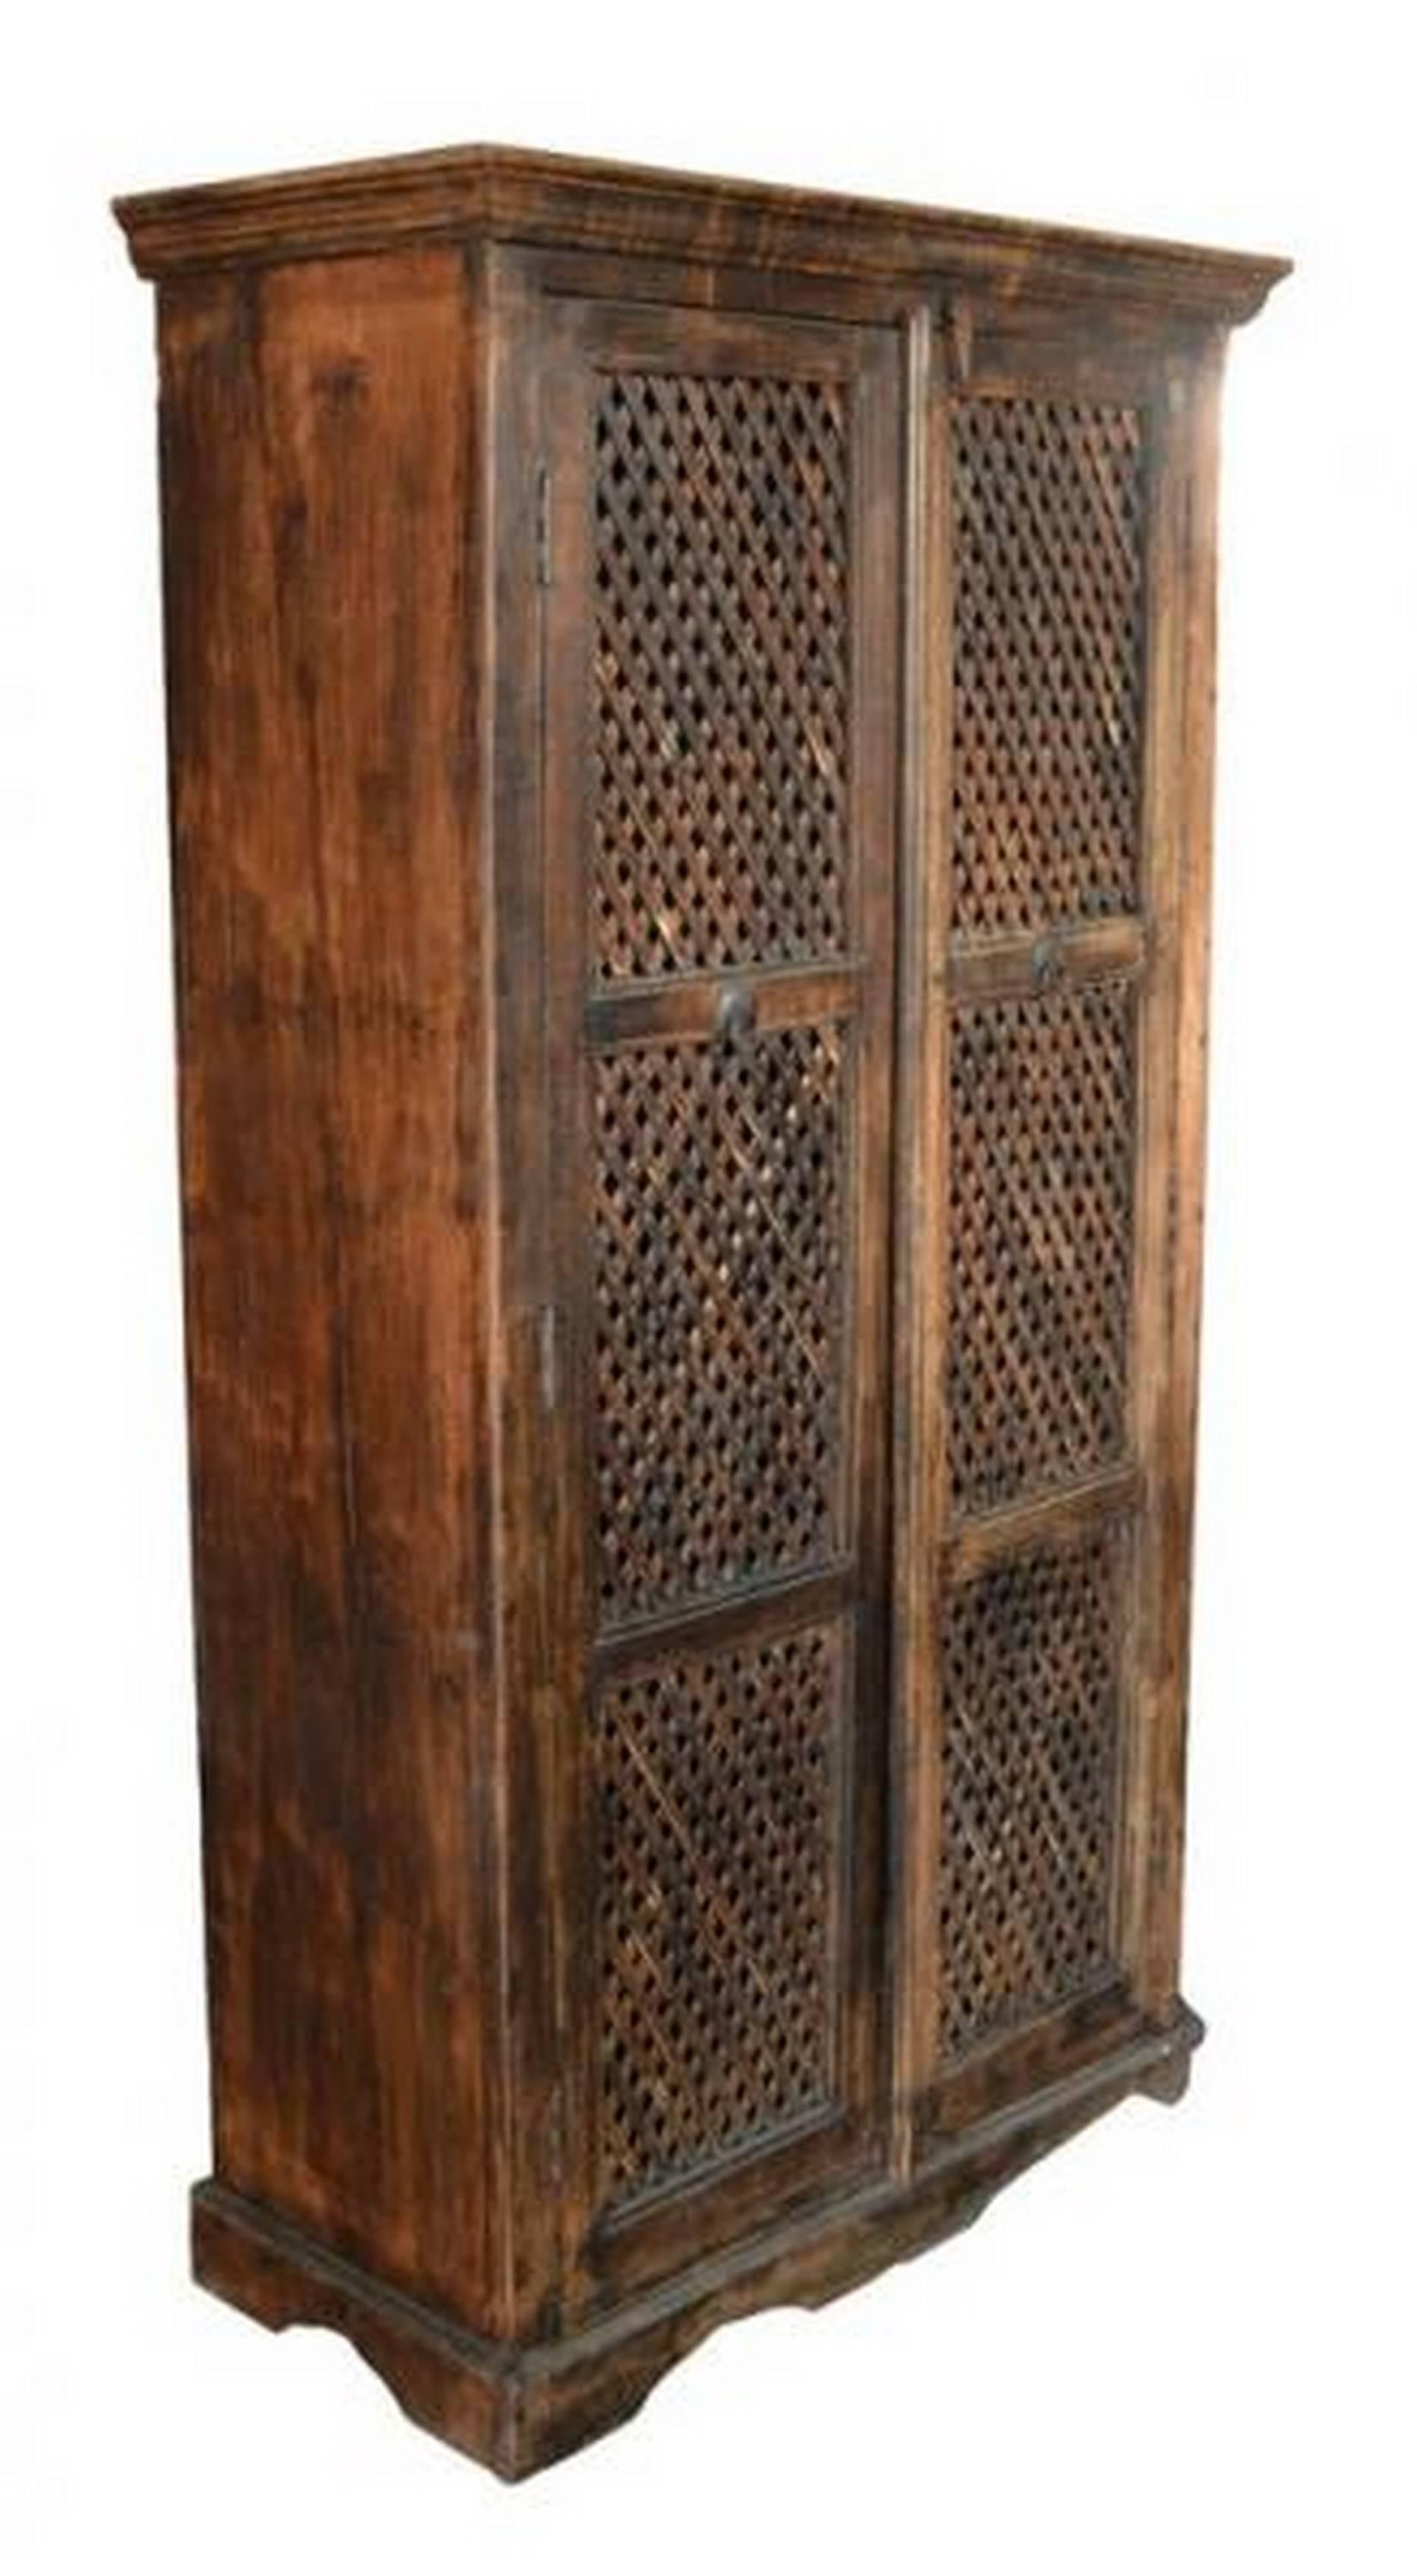 Antique carved Indian cabinet / armoire with carved lattice-style doors.